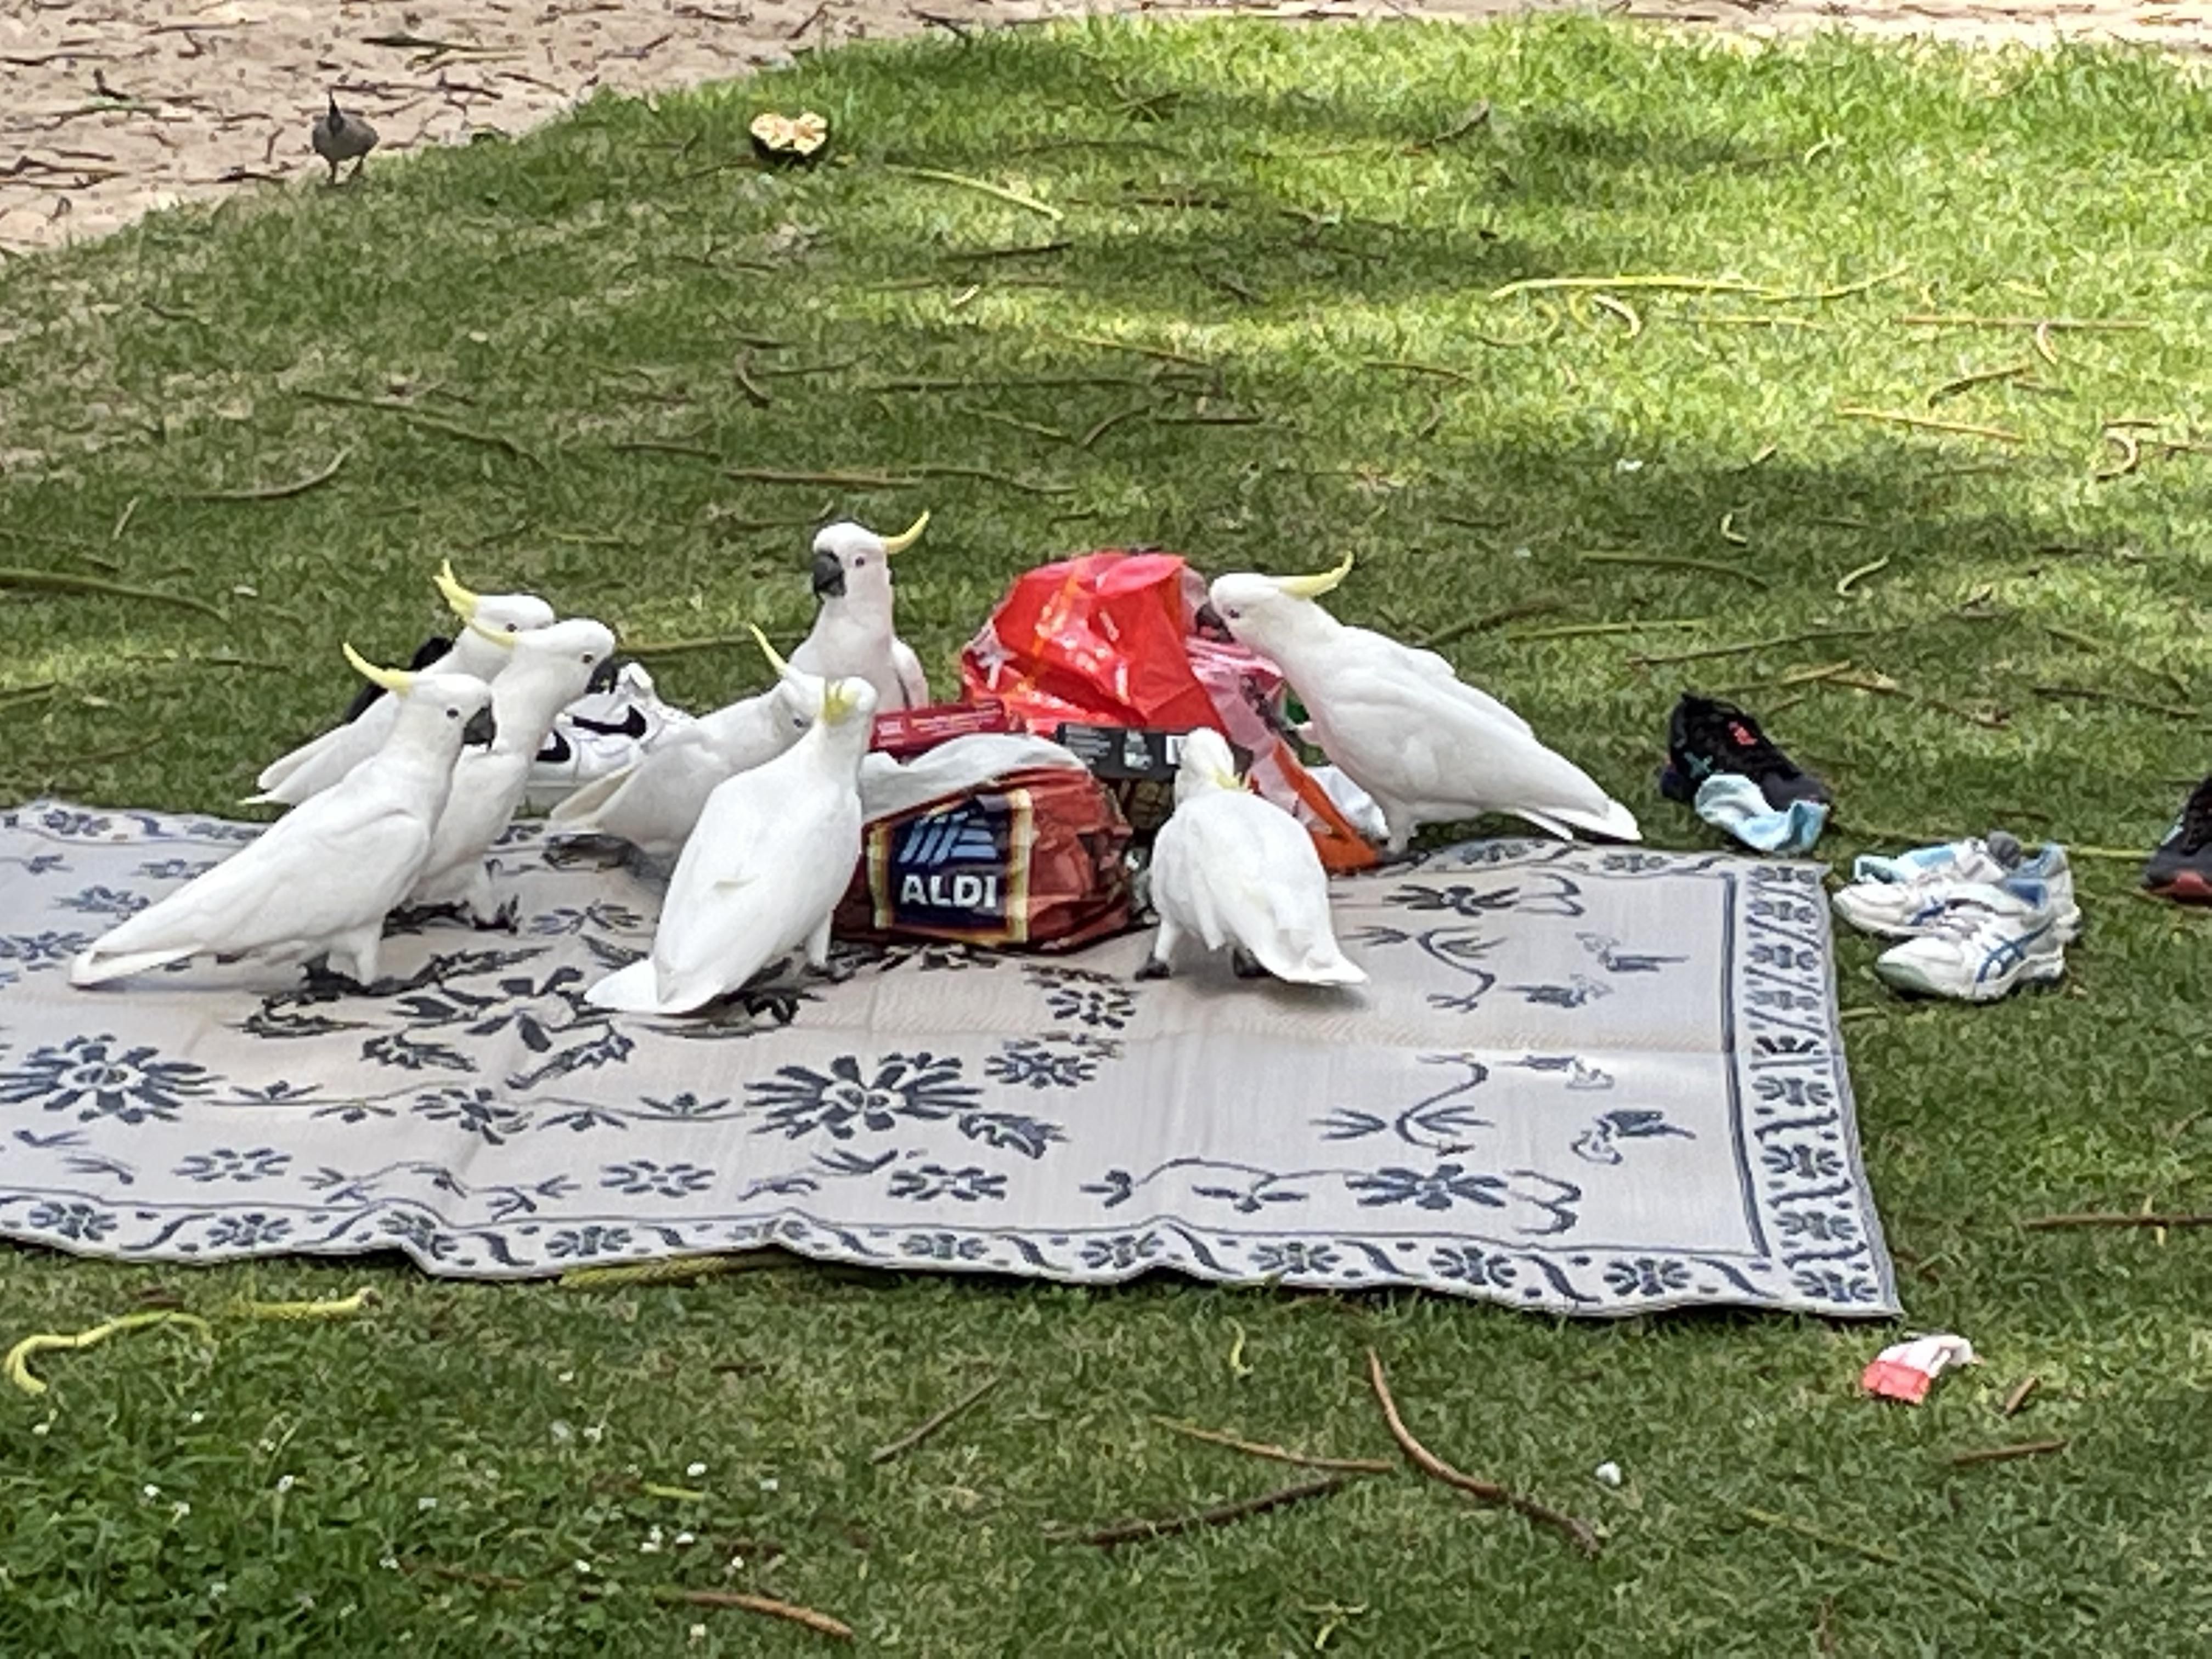 Never leave your picnic unattended in Australia.